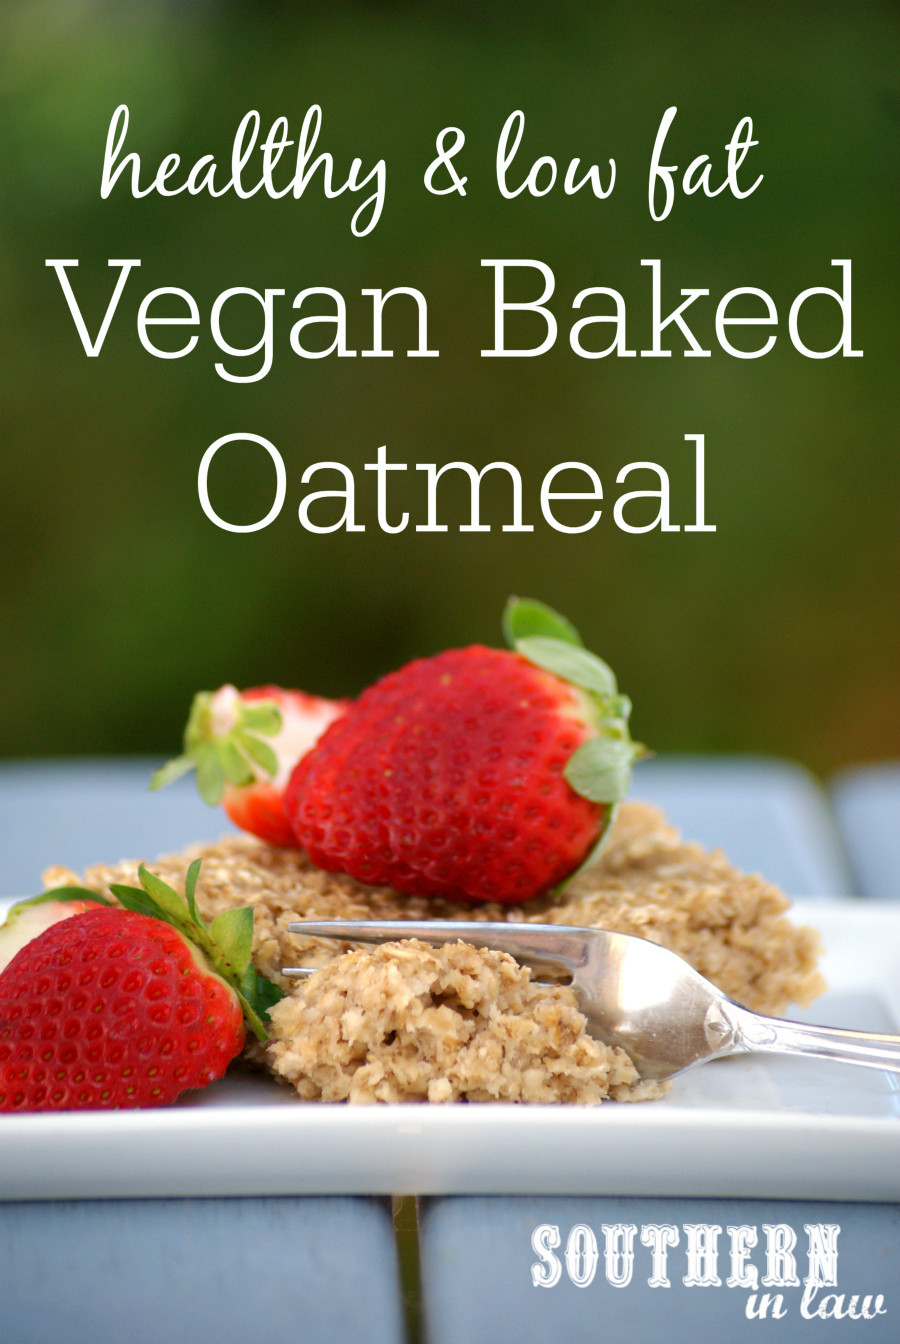 Vegan Baked Oatmeal Recipes
 Southern In Law Recipe The Best Vegan Baked Oatmeal